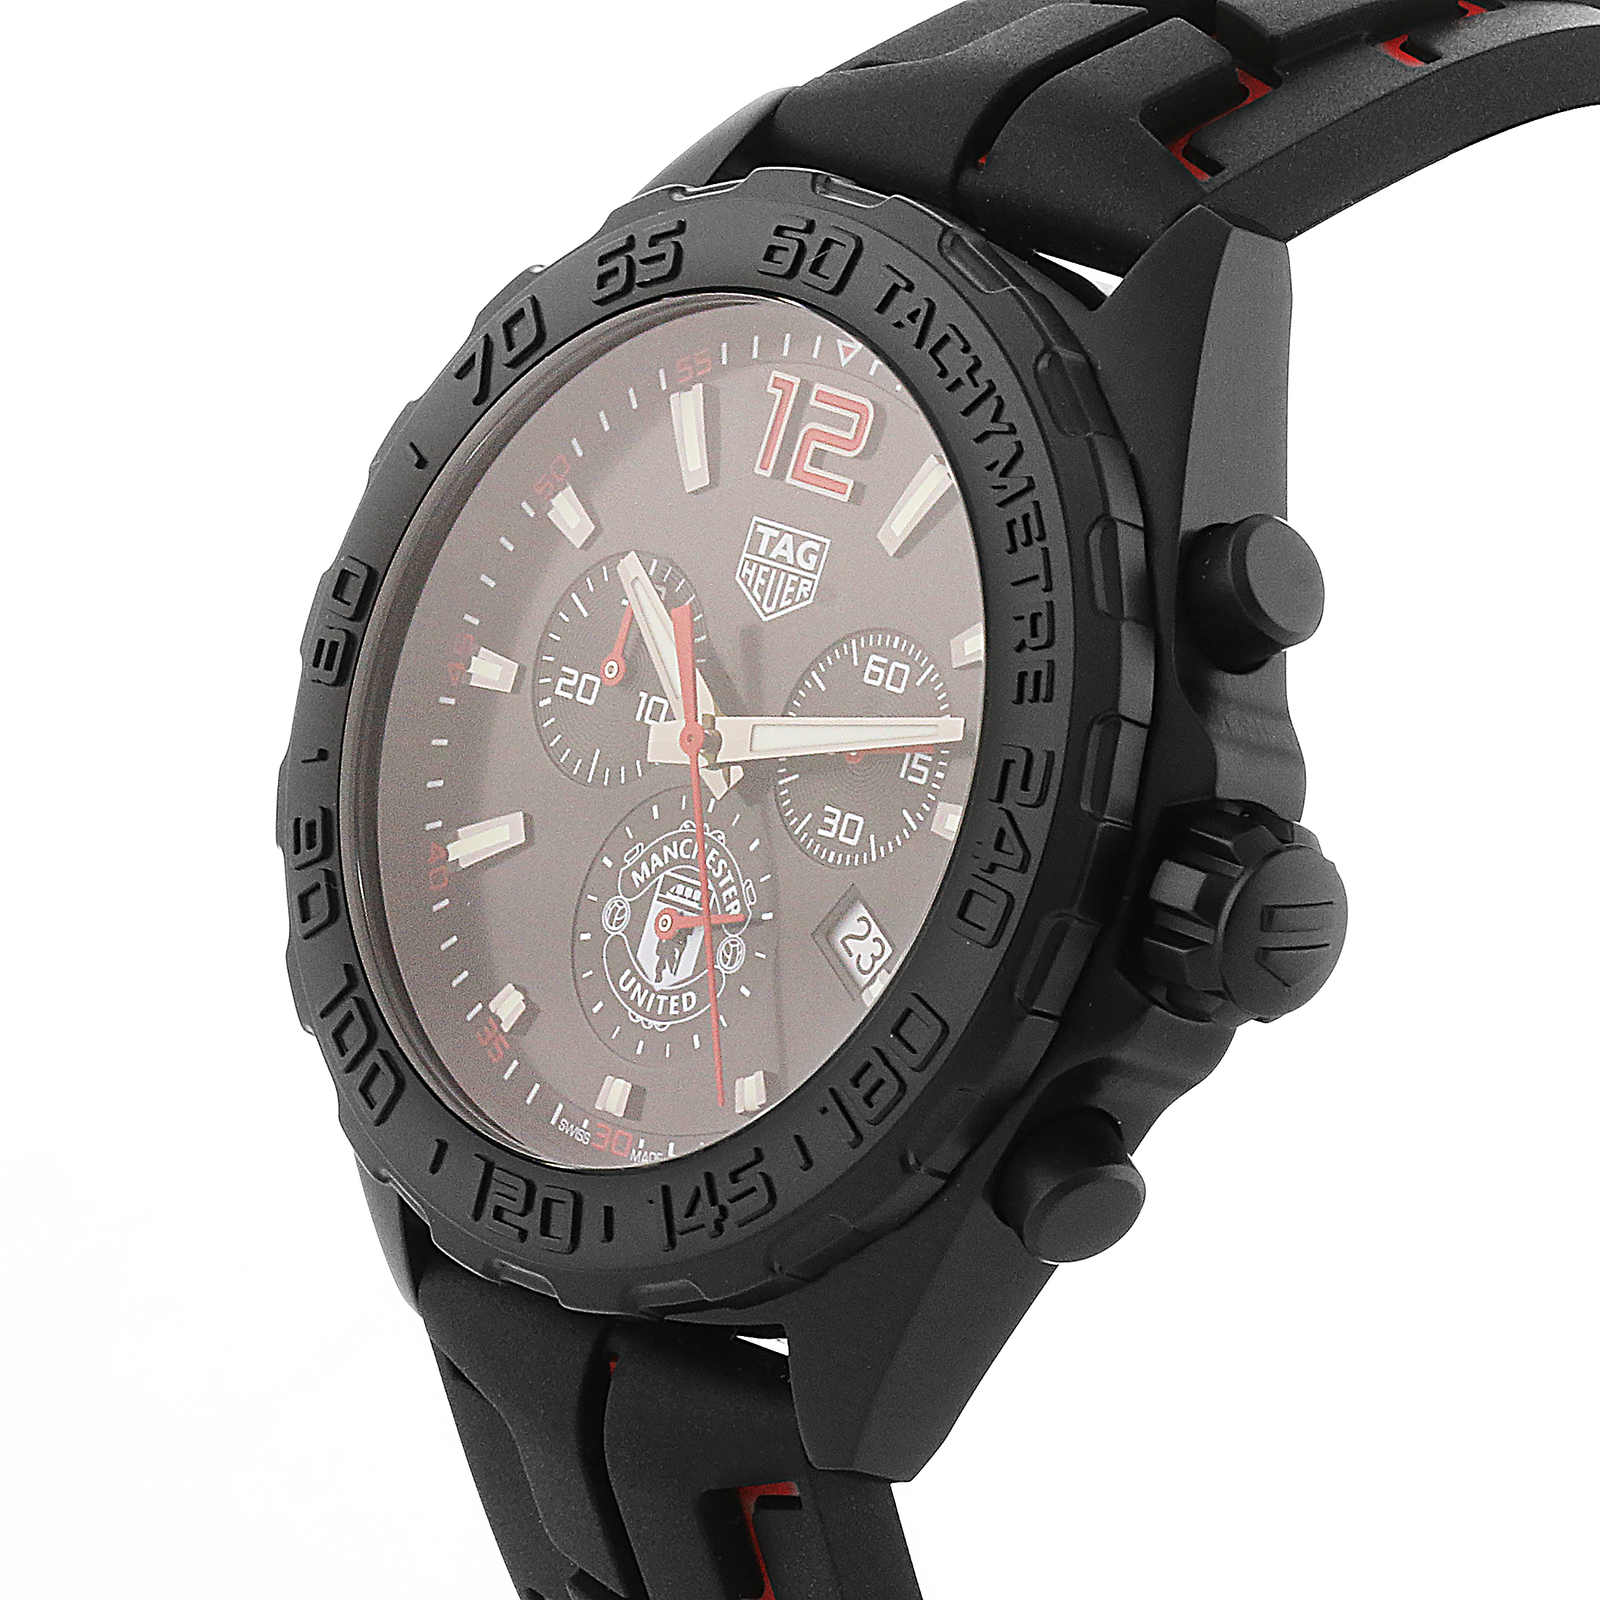 TAG Heuer Manchester United Formula 1 | Luxury Watches | Watches